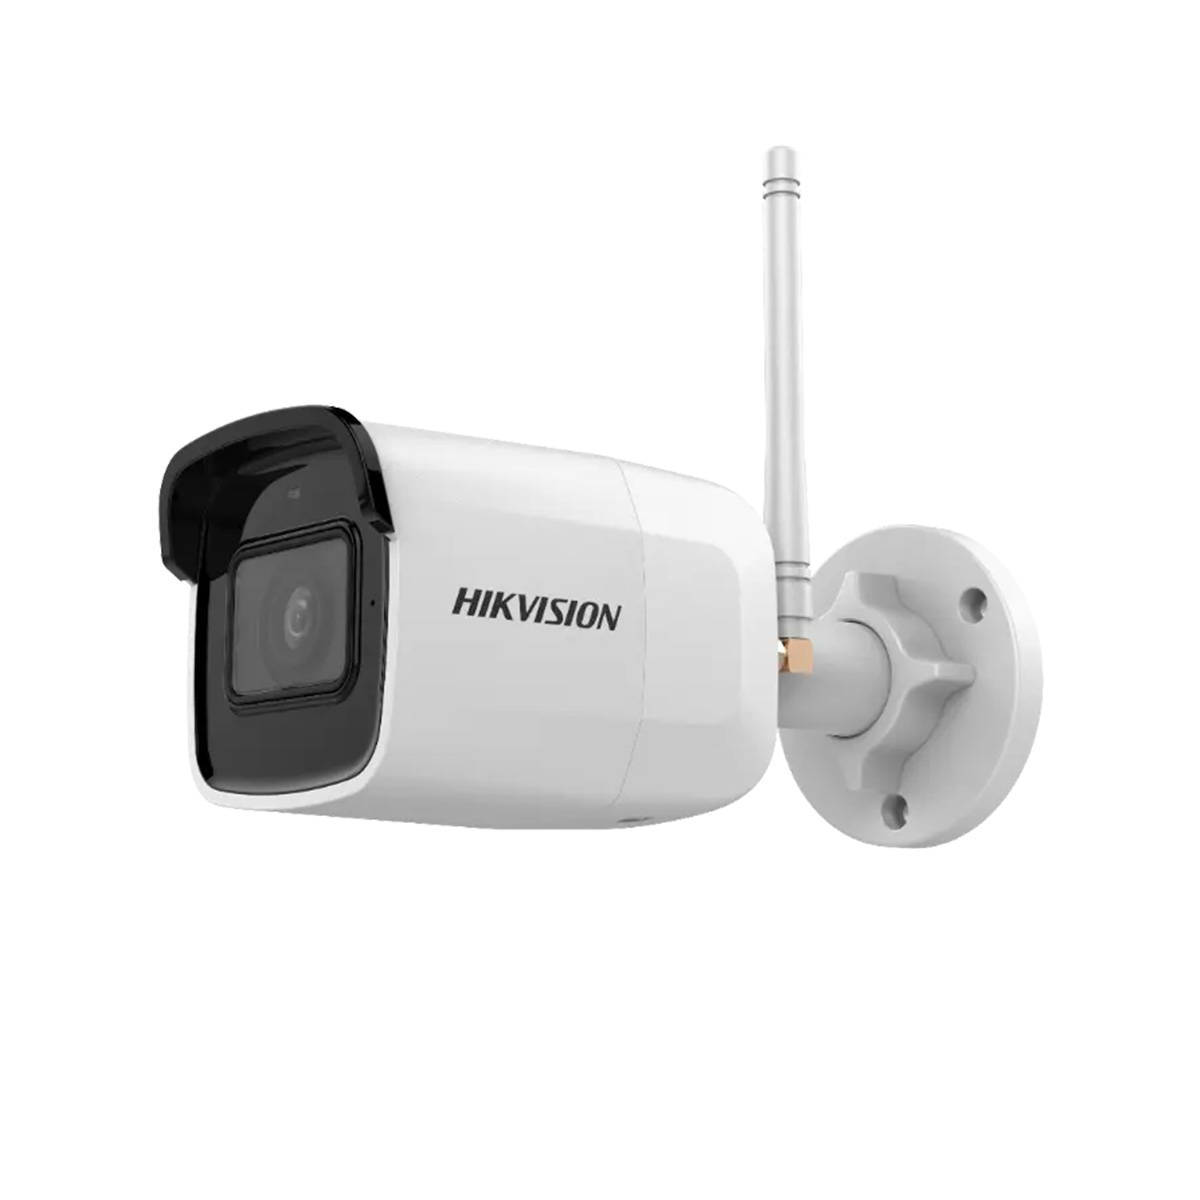 Hikvision 4MP Fixed Bullet Network Camera with Build-in Mic – DS‐2CD2041G1‐IDW